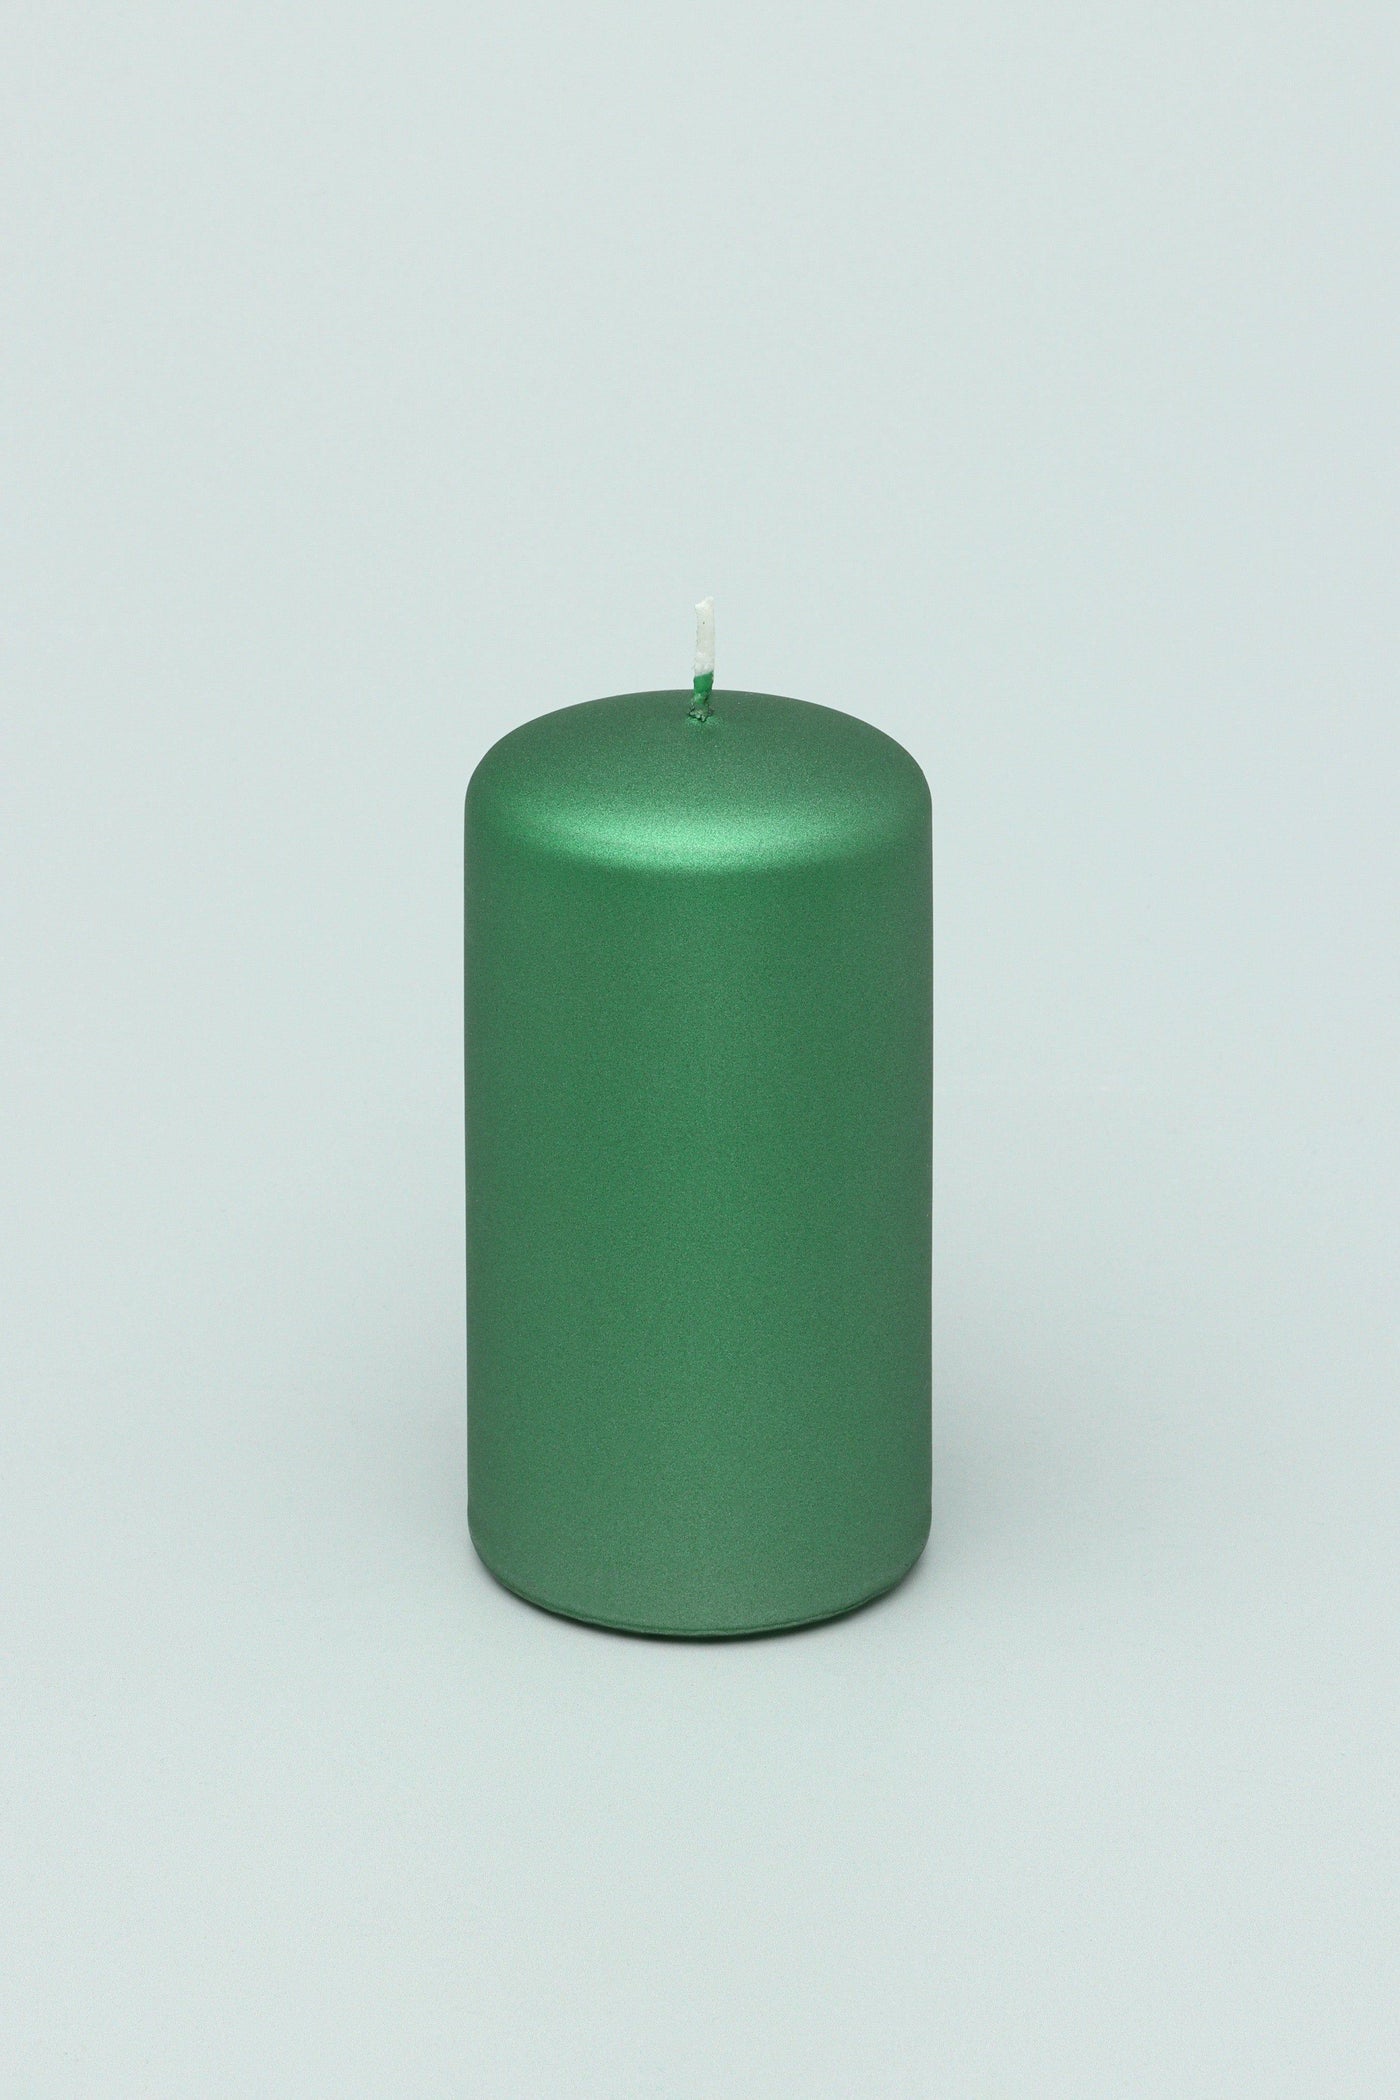 Gdecorstore Candles & Candle Holders Green / Medium Grace Forest Green Varnished Shimmer Metallic Shine Pillar Candle